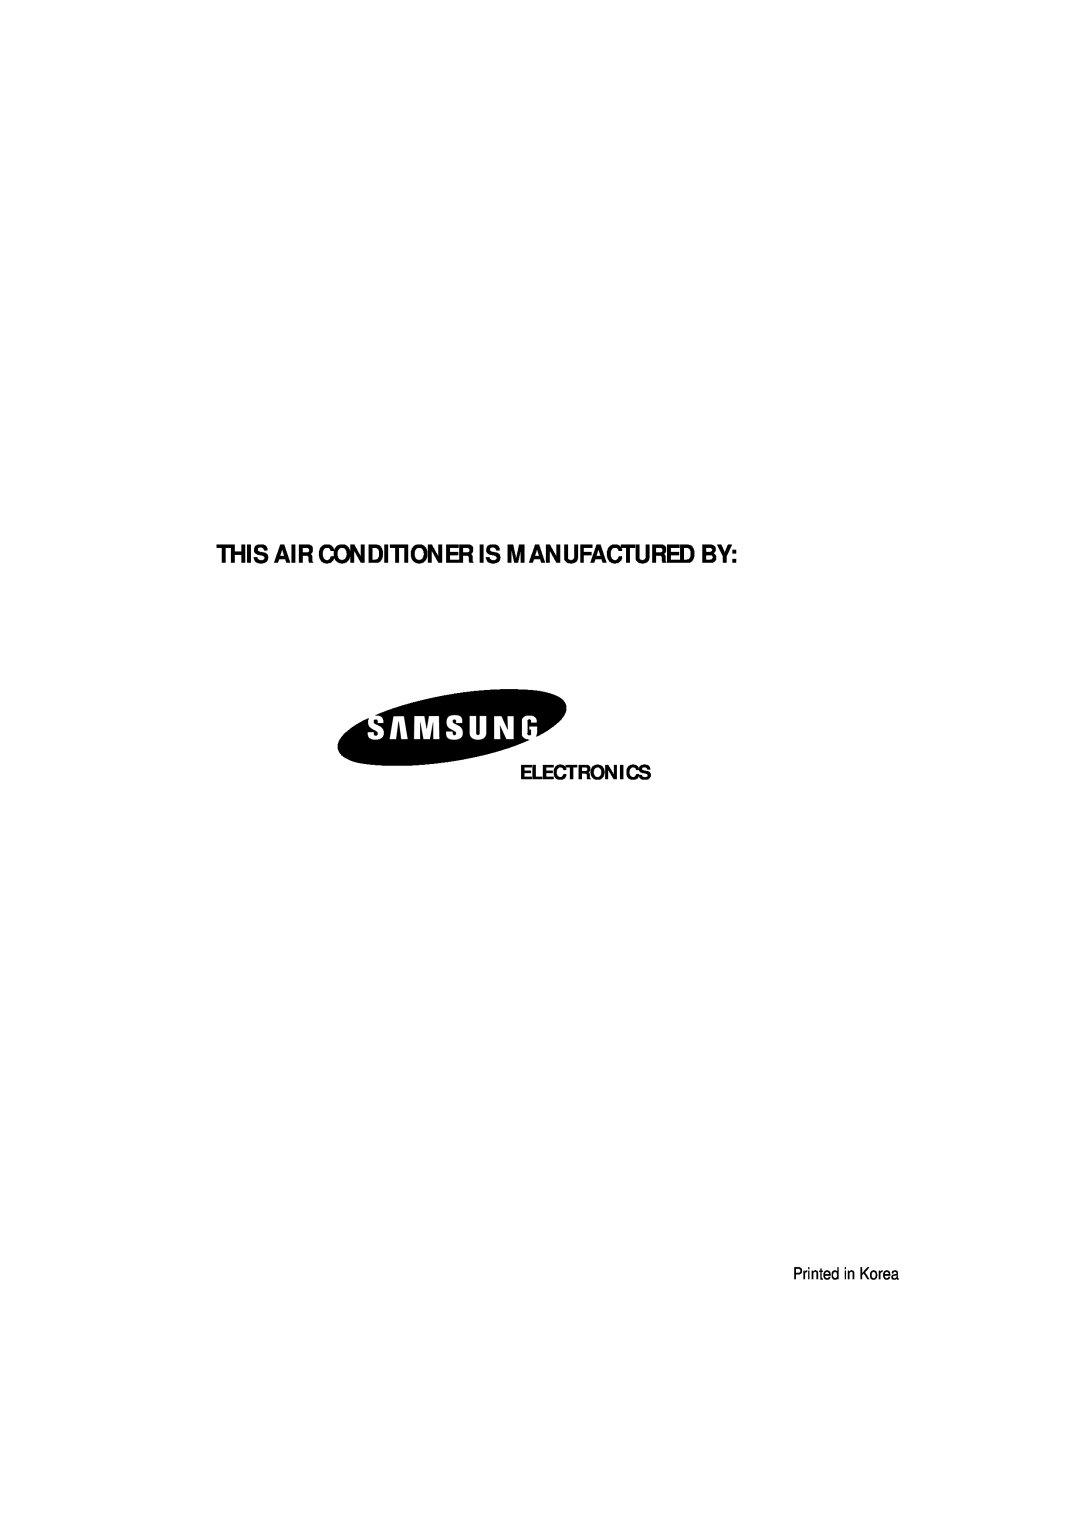 Samsung AP500F installation manual This Air Conditioner Is Manufactured By, Electronics 